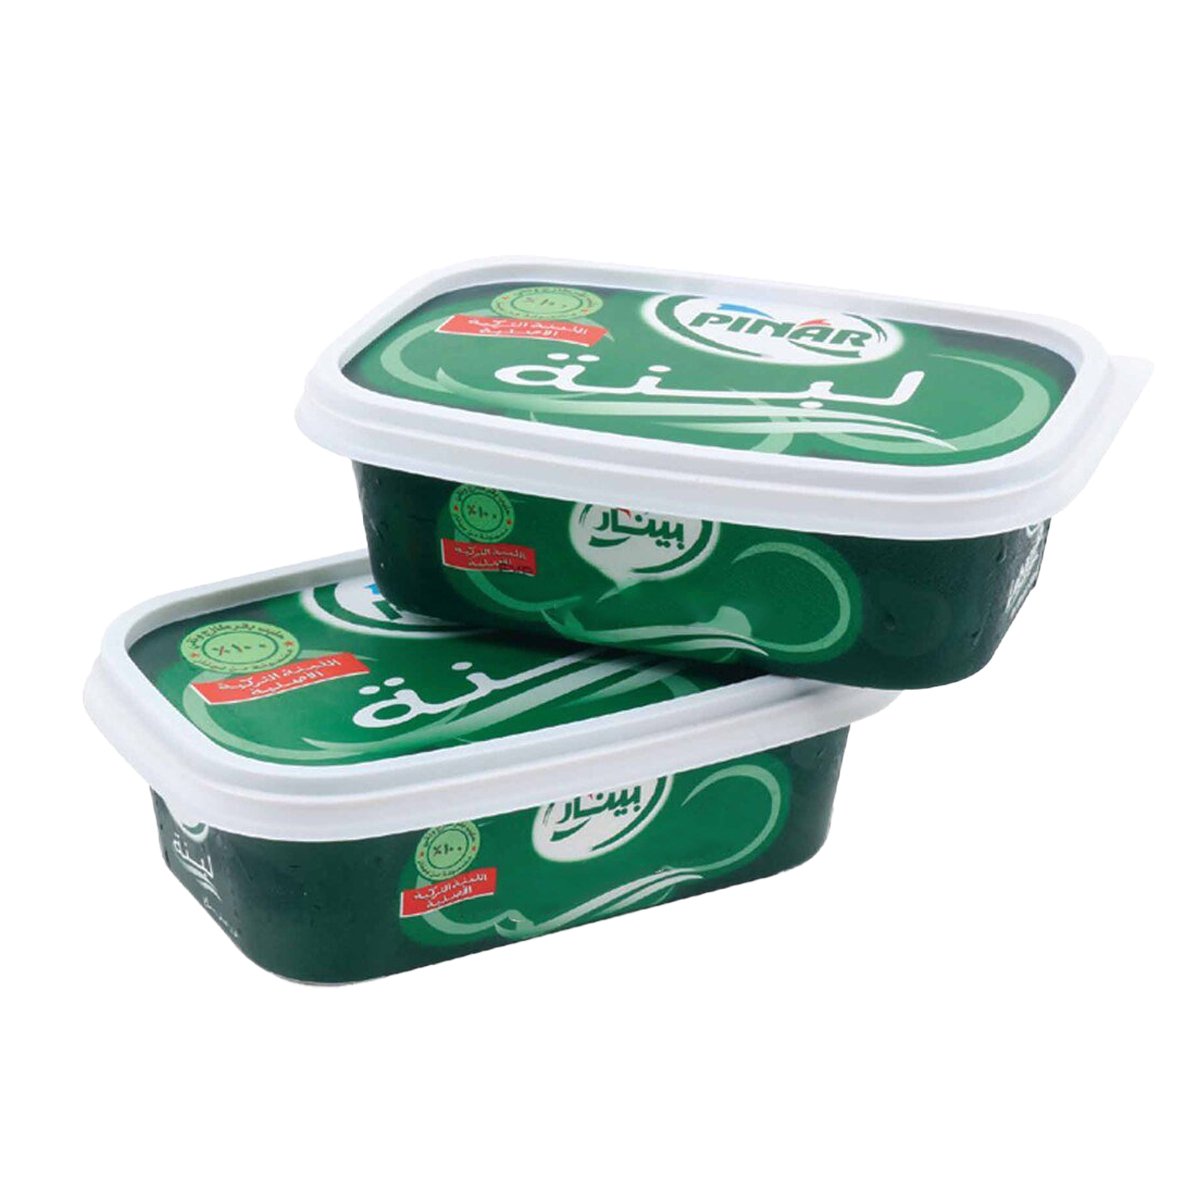 Pinar Labneh Value Pack 2 x 400 g